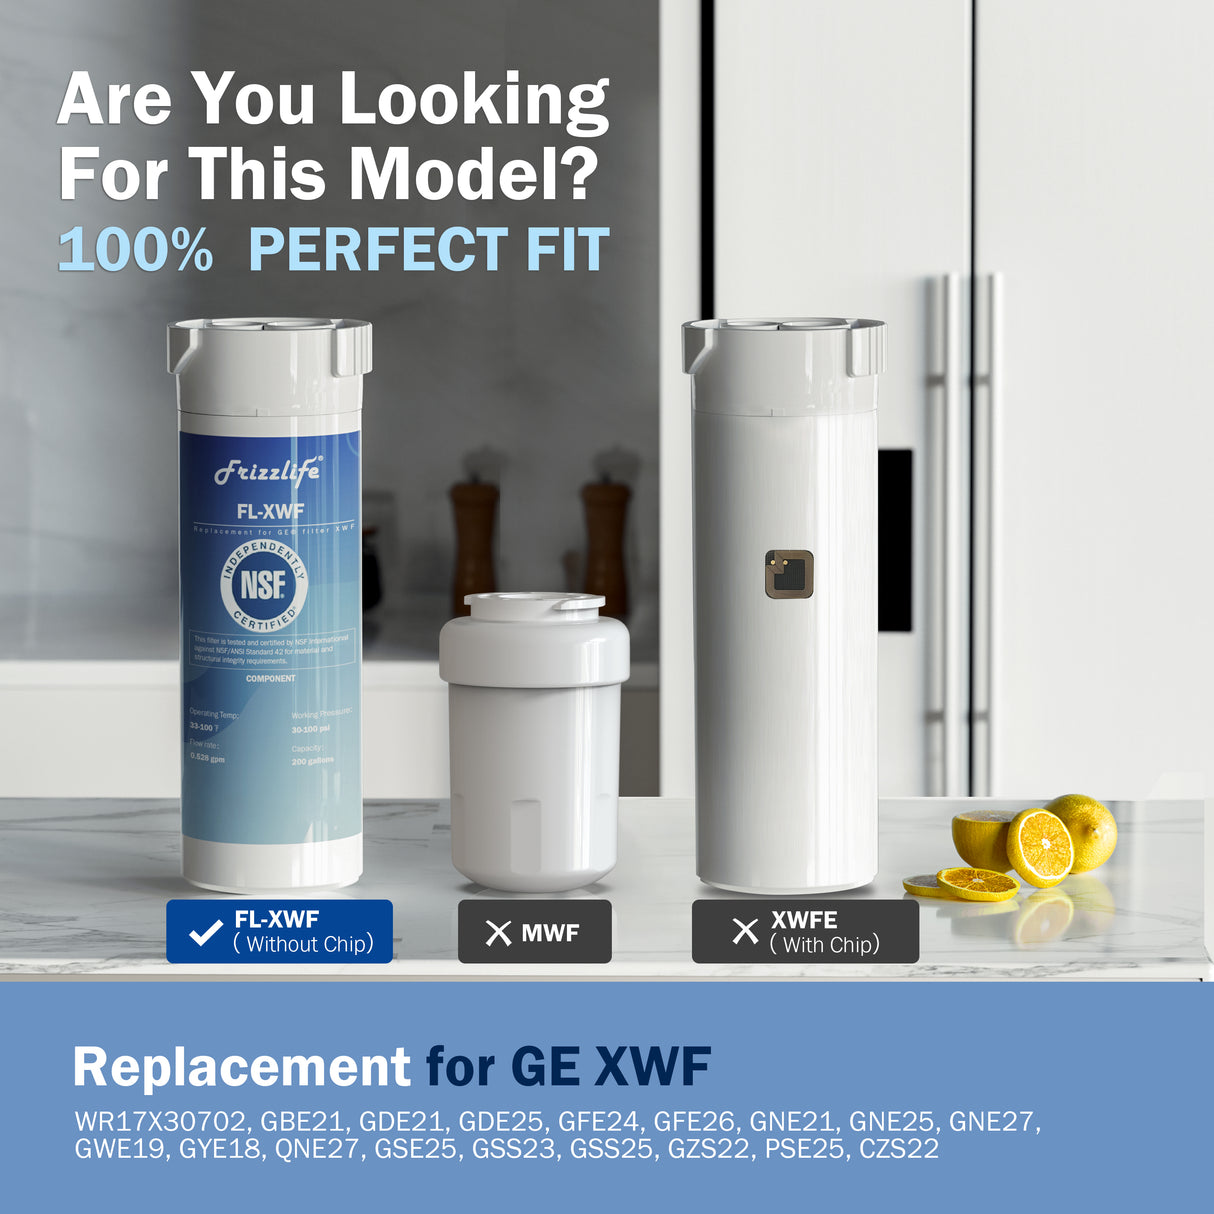 Frizzlife XWF(NOT XWFE) Refrigerator Water Filter Replacement for GE XWF, NSF Certified Fit the Original Brand, Leak-proof Design